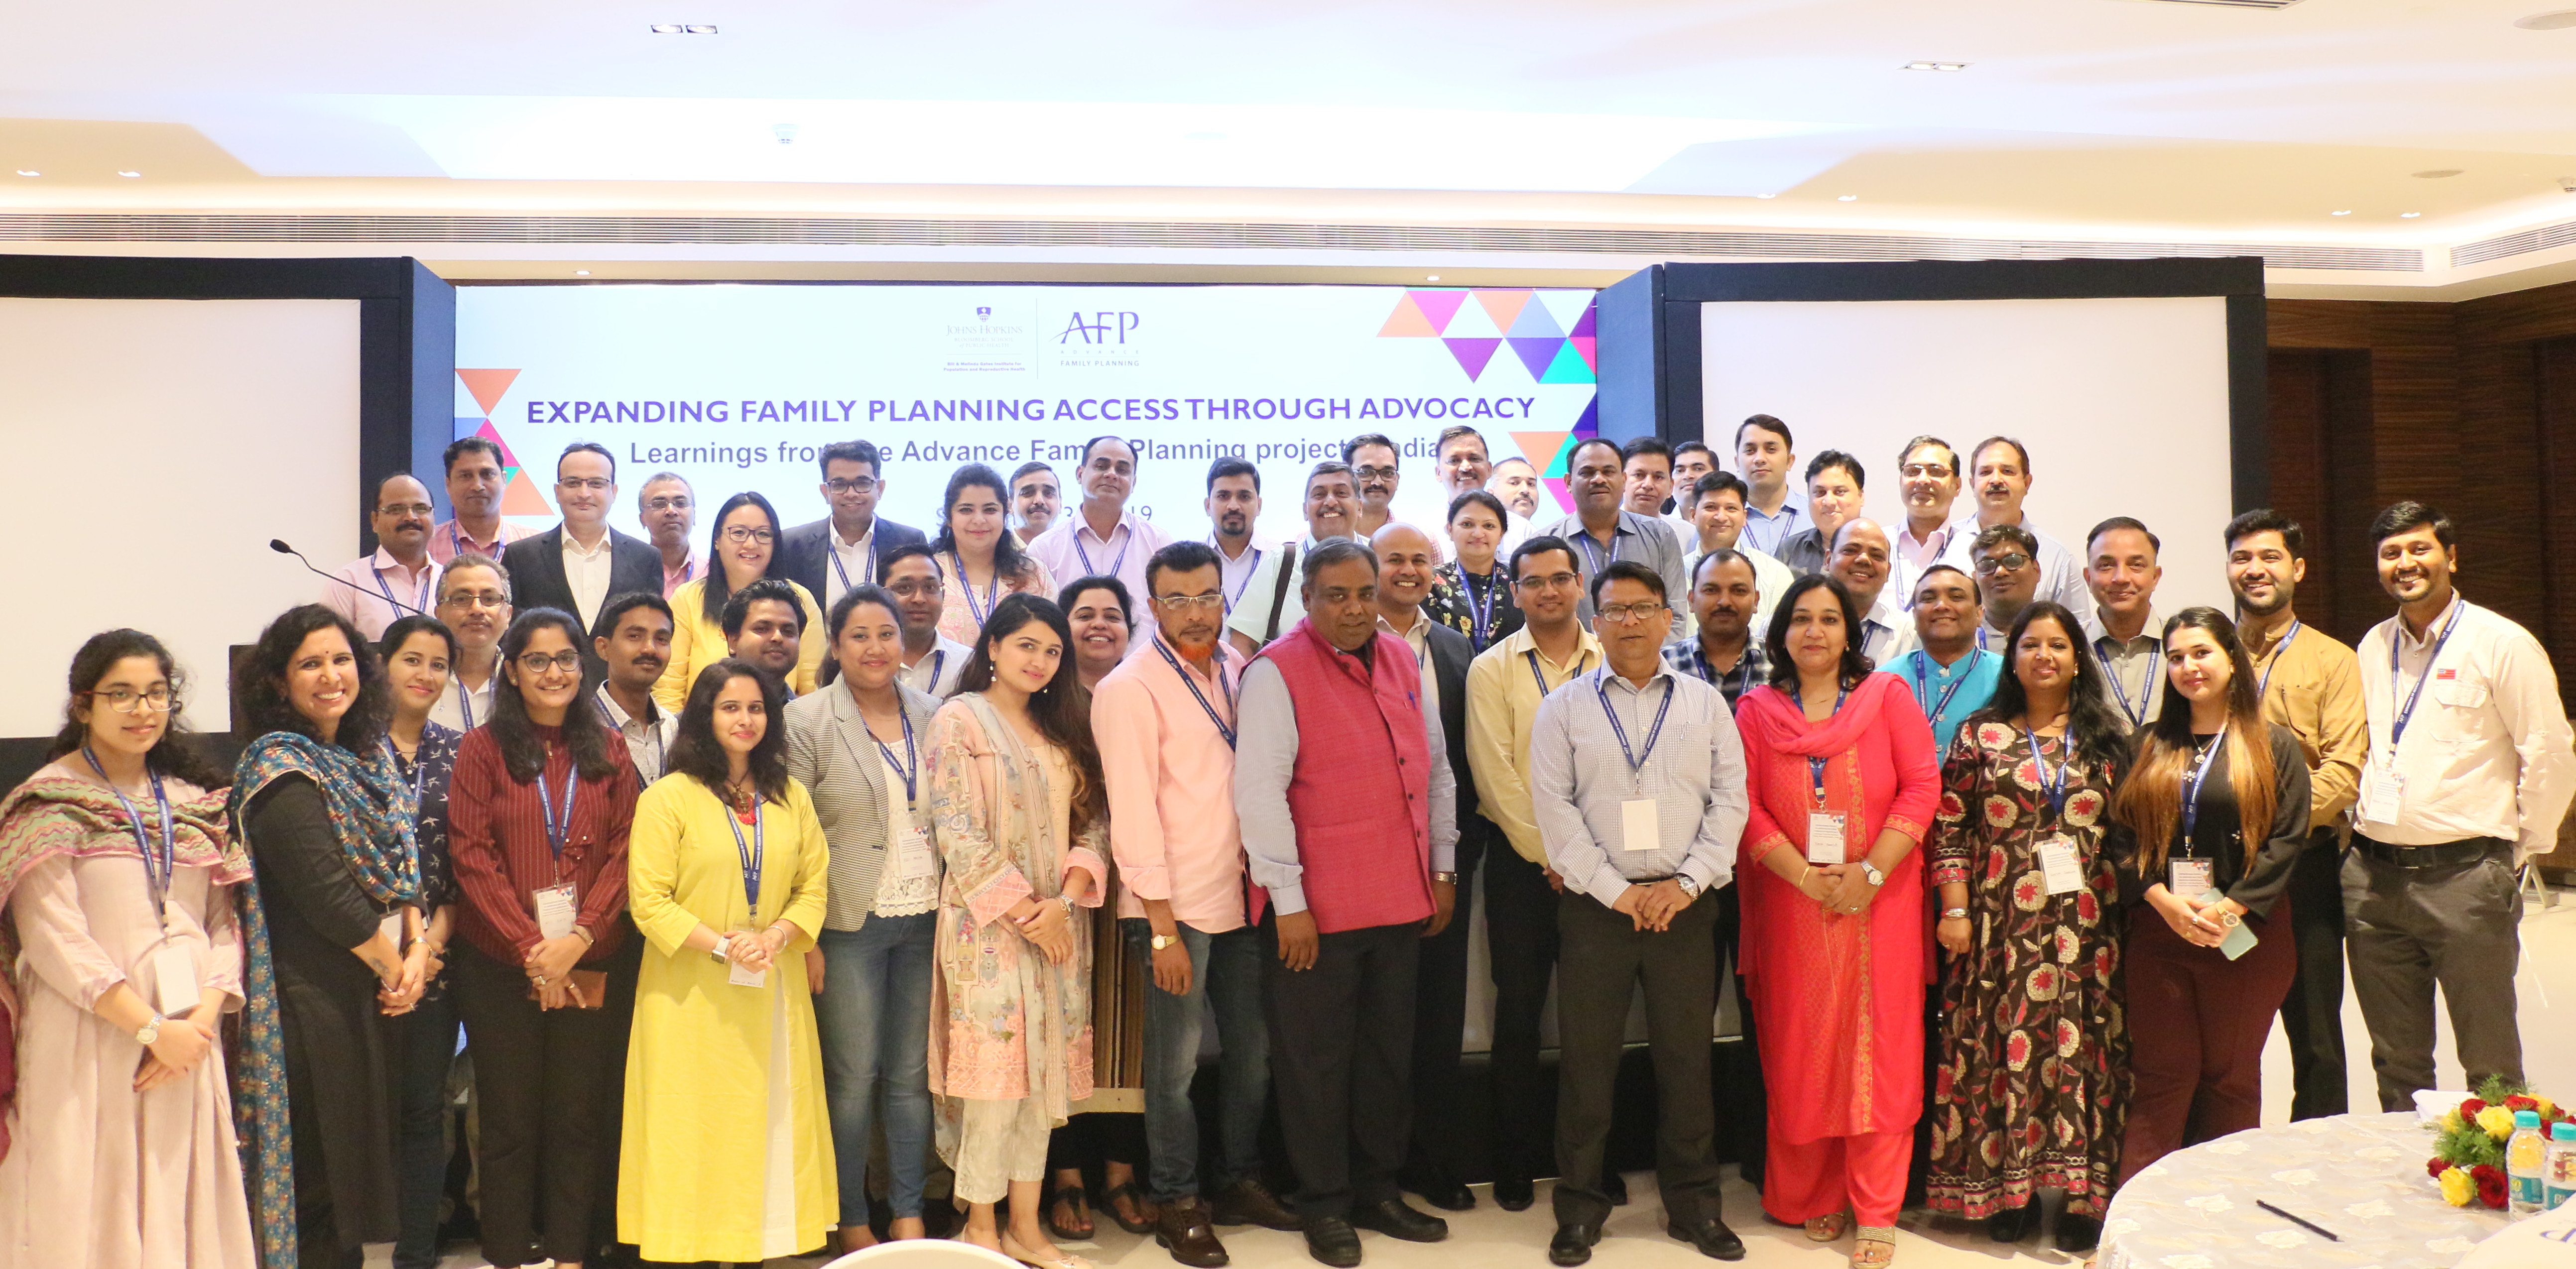 Group picture at AFP Seminar in India August 30, 2019